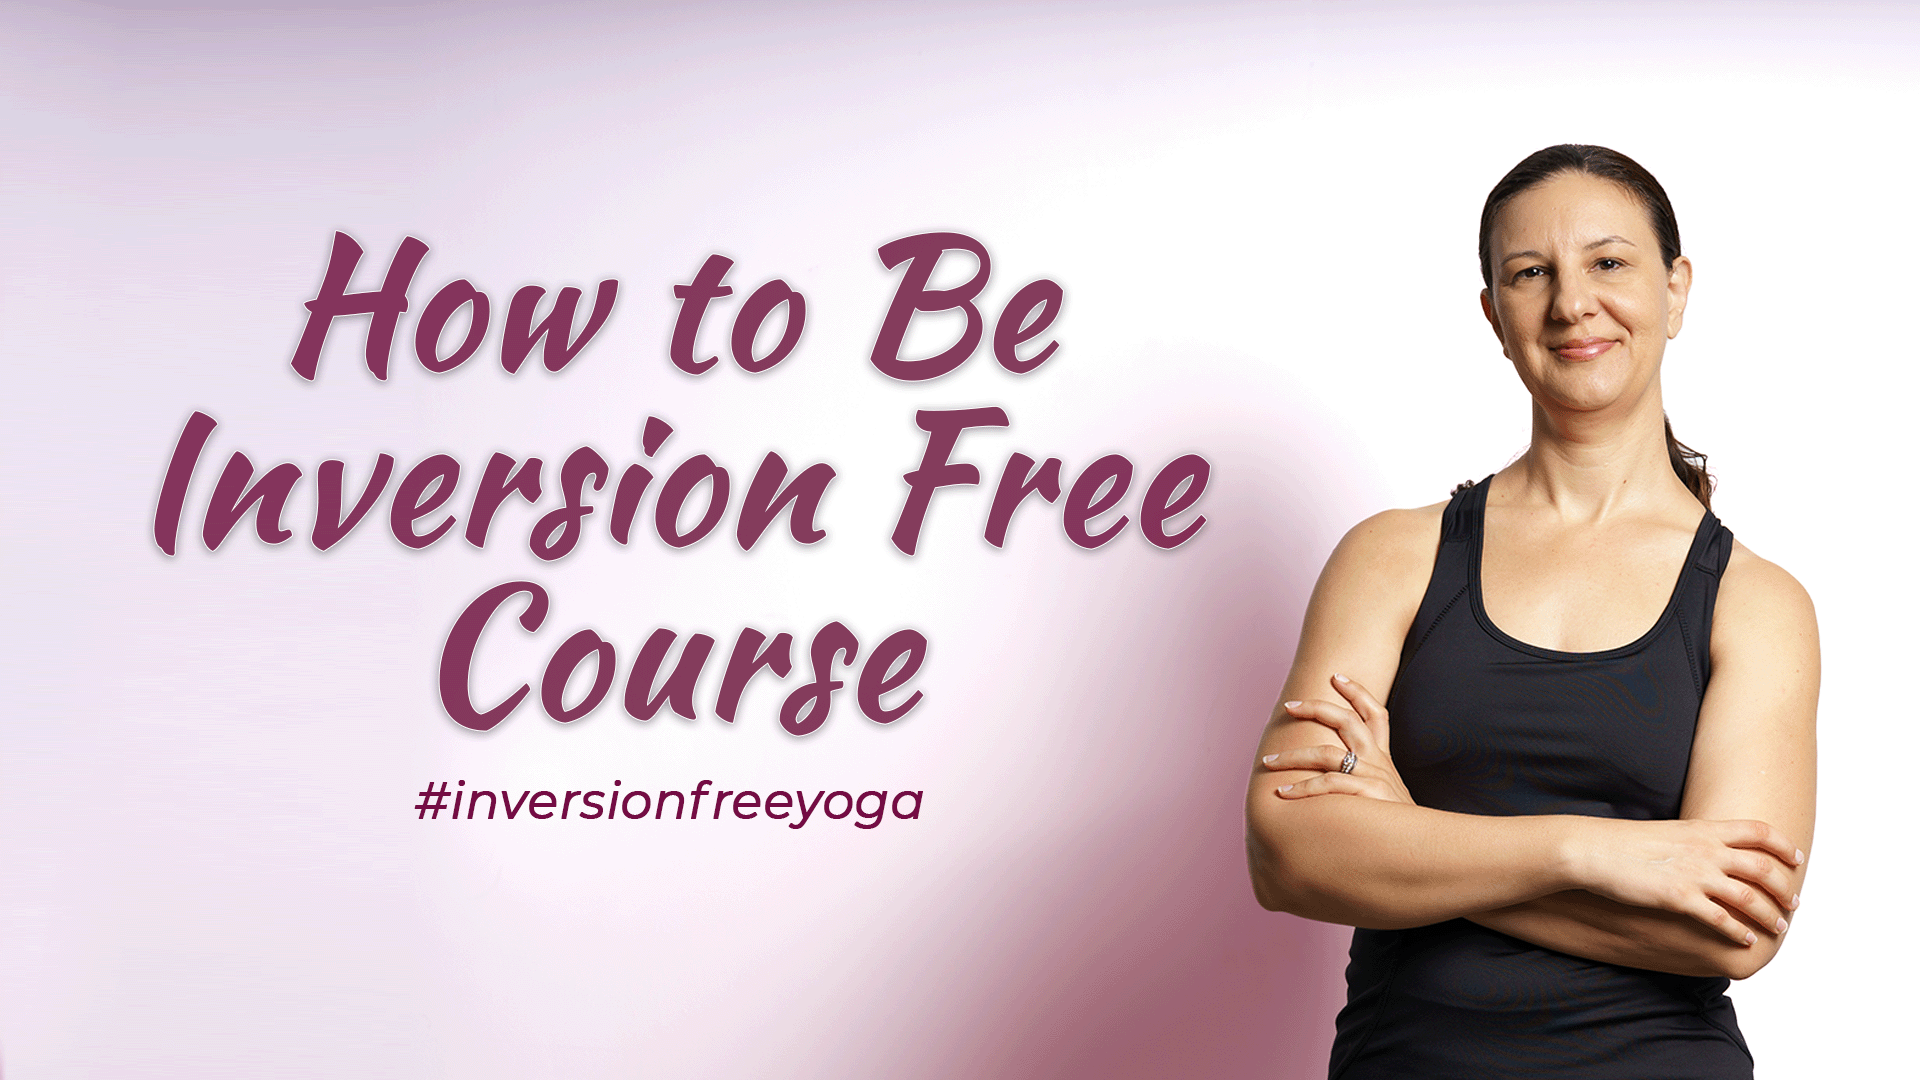 How to Be Inversion Free Course